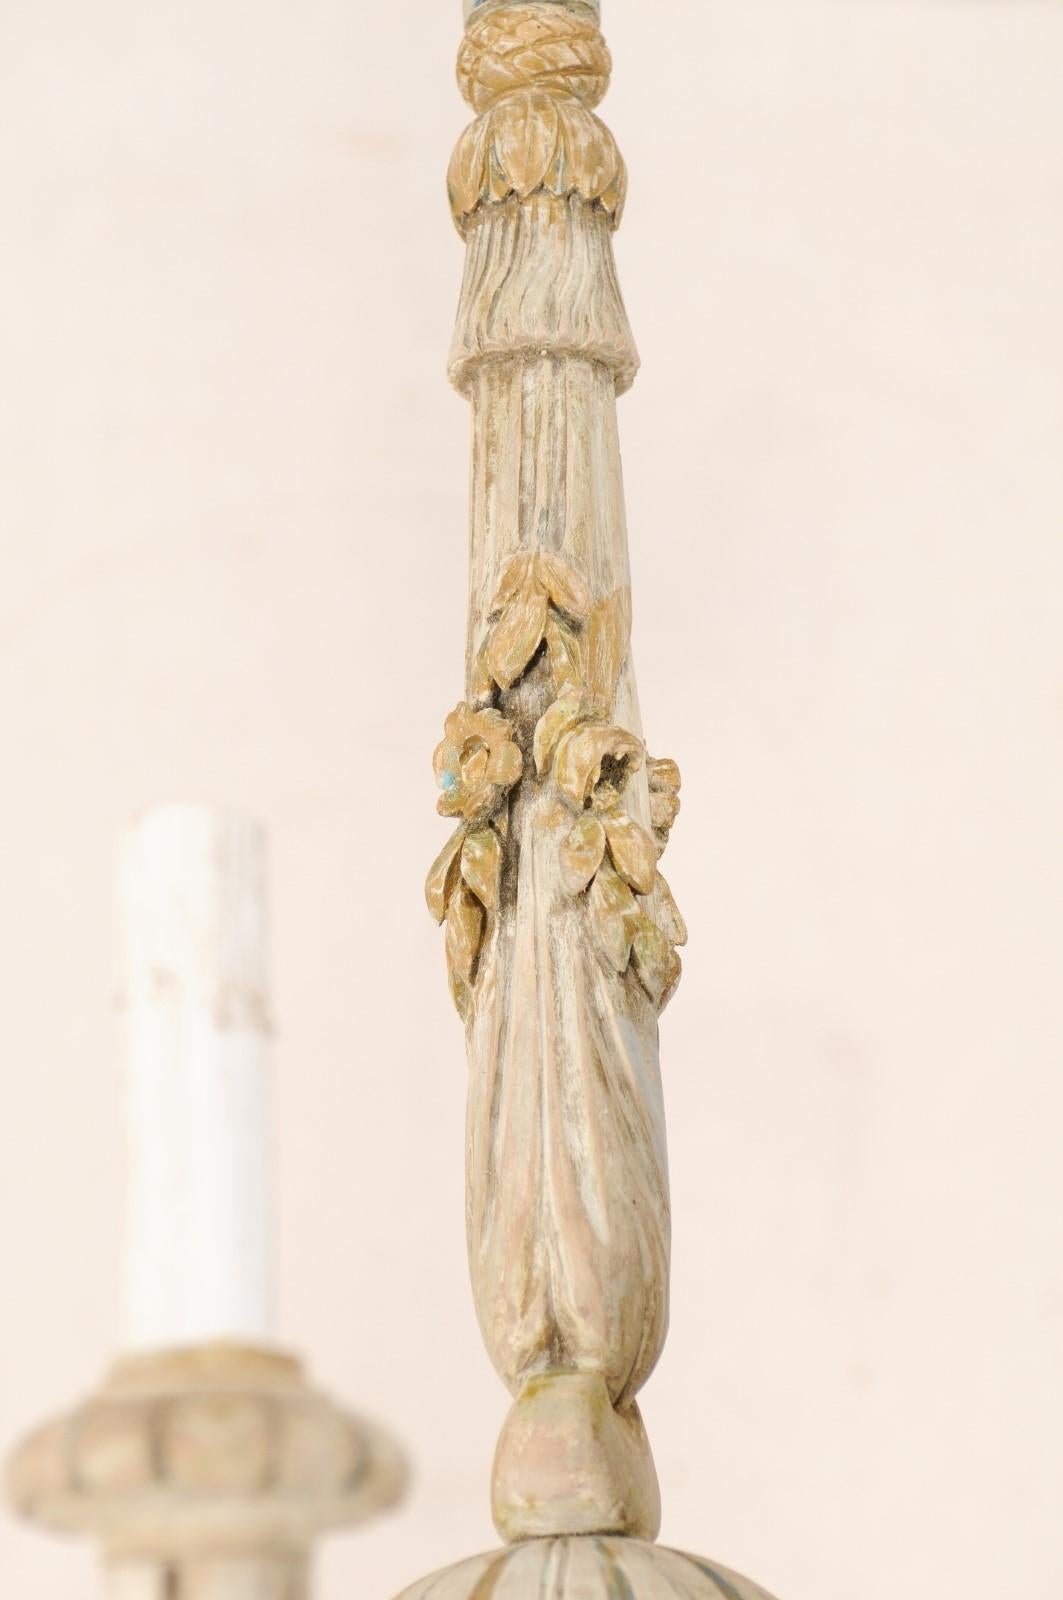 20th Century French Five-Light Carved Wood Chandelier with Floral & Foliage Motif, Cute Size